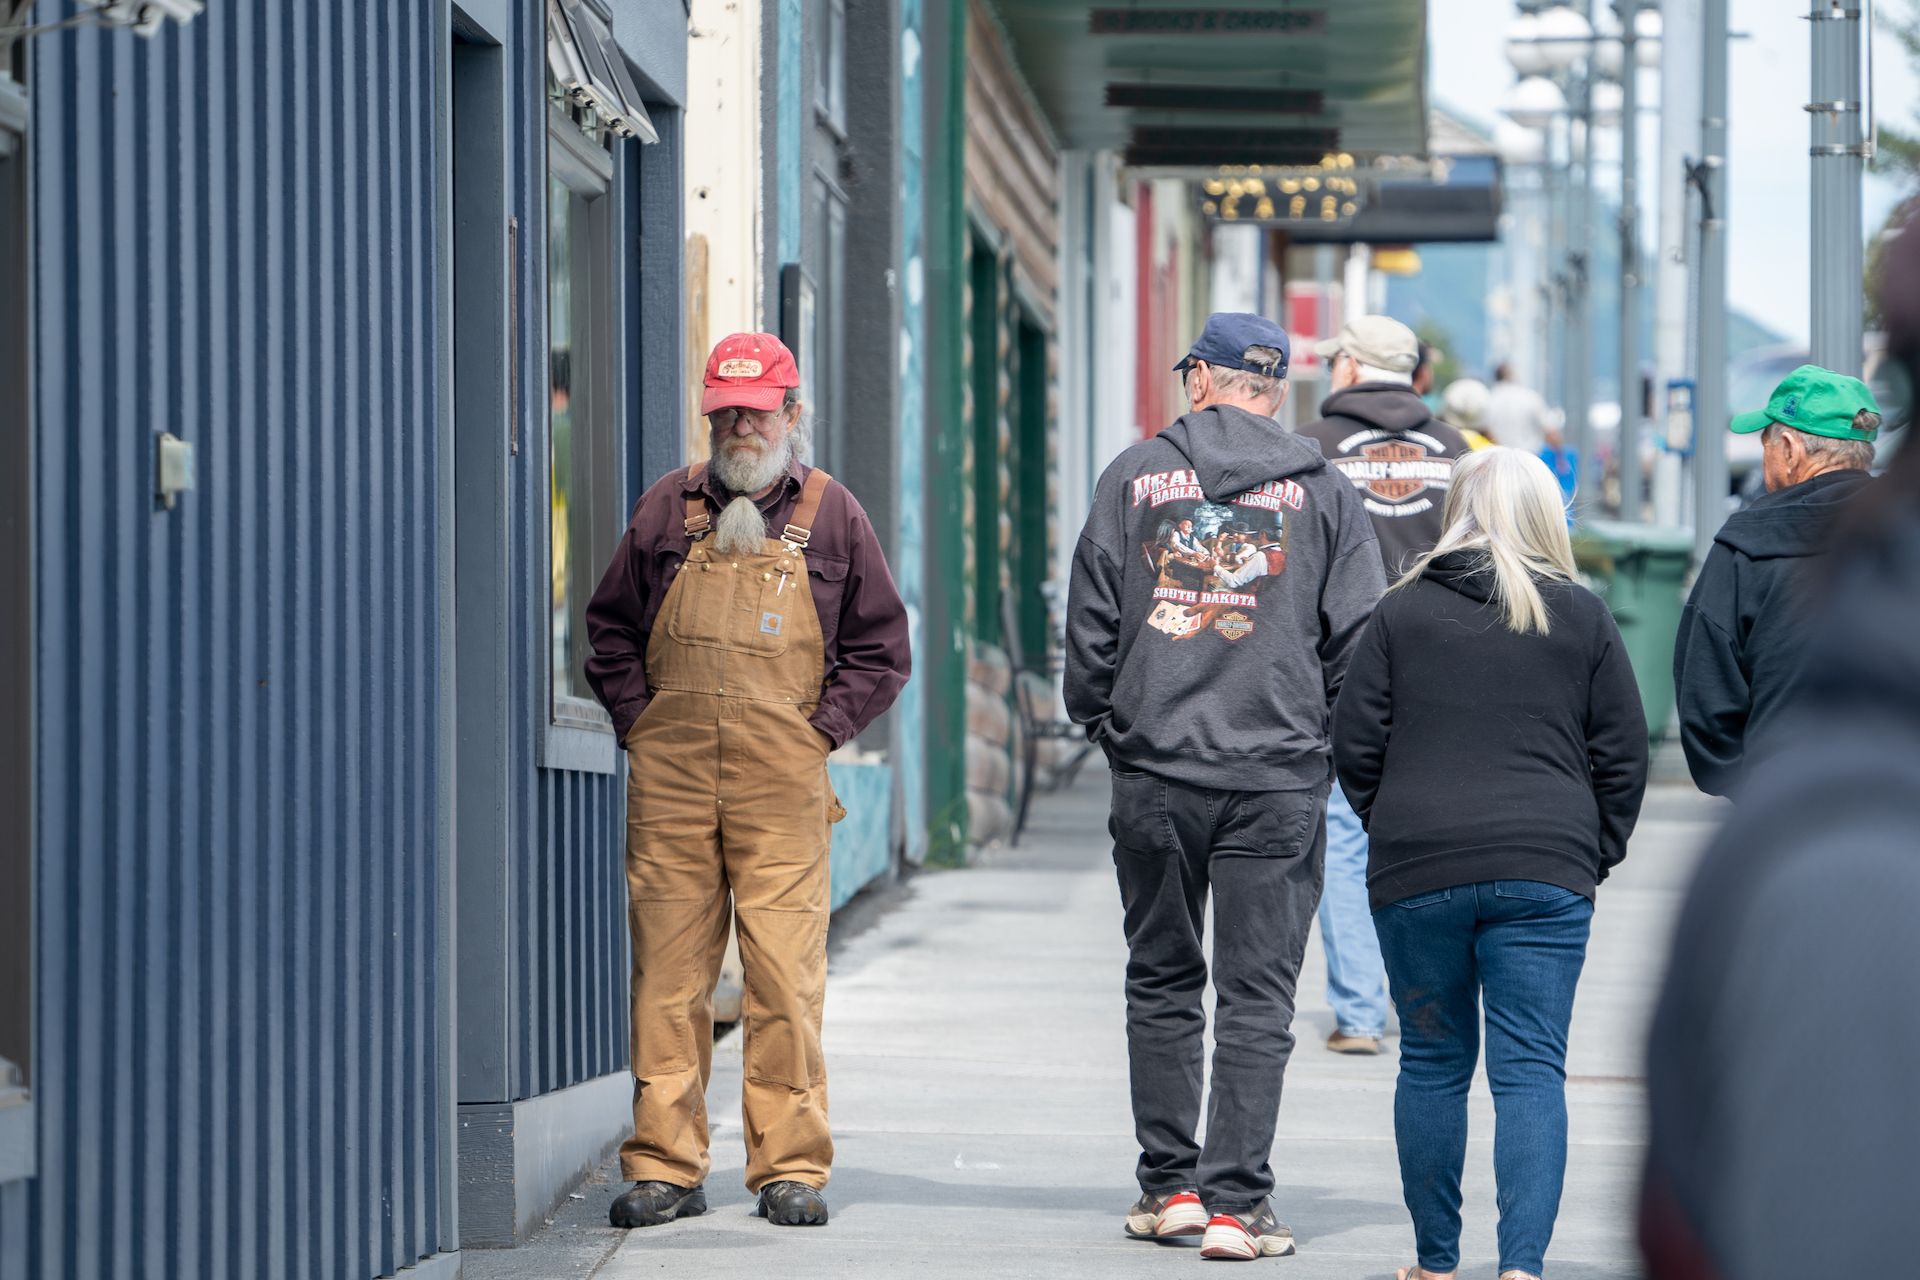 Locals and tourists in downtown Seward